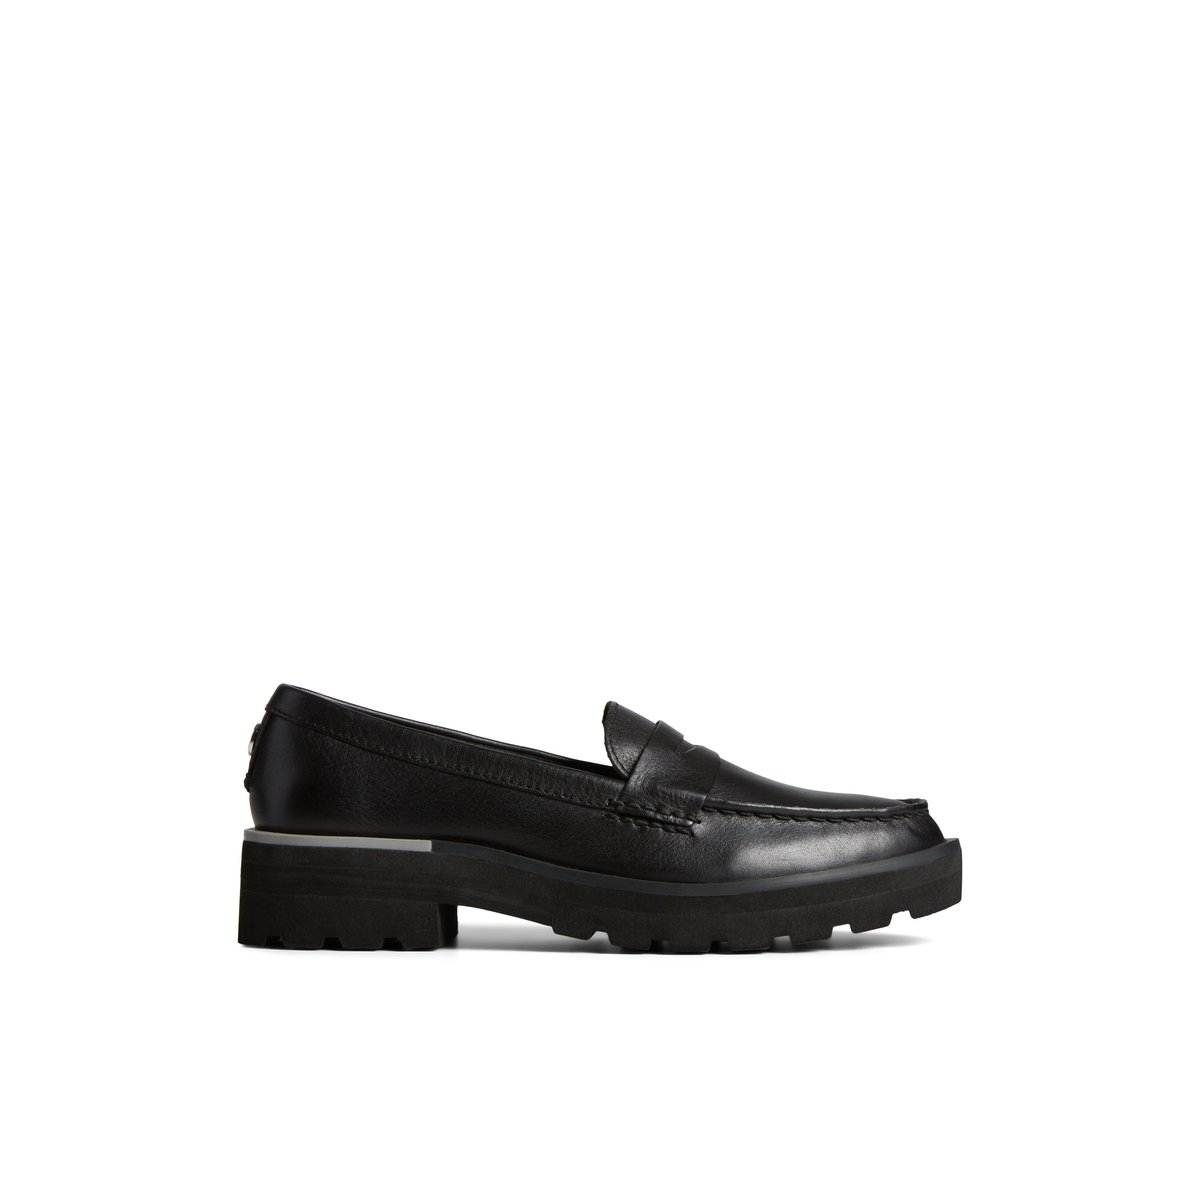 Lug Penny Loafer Black Women's Oxfords & Loafers | Sperry US